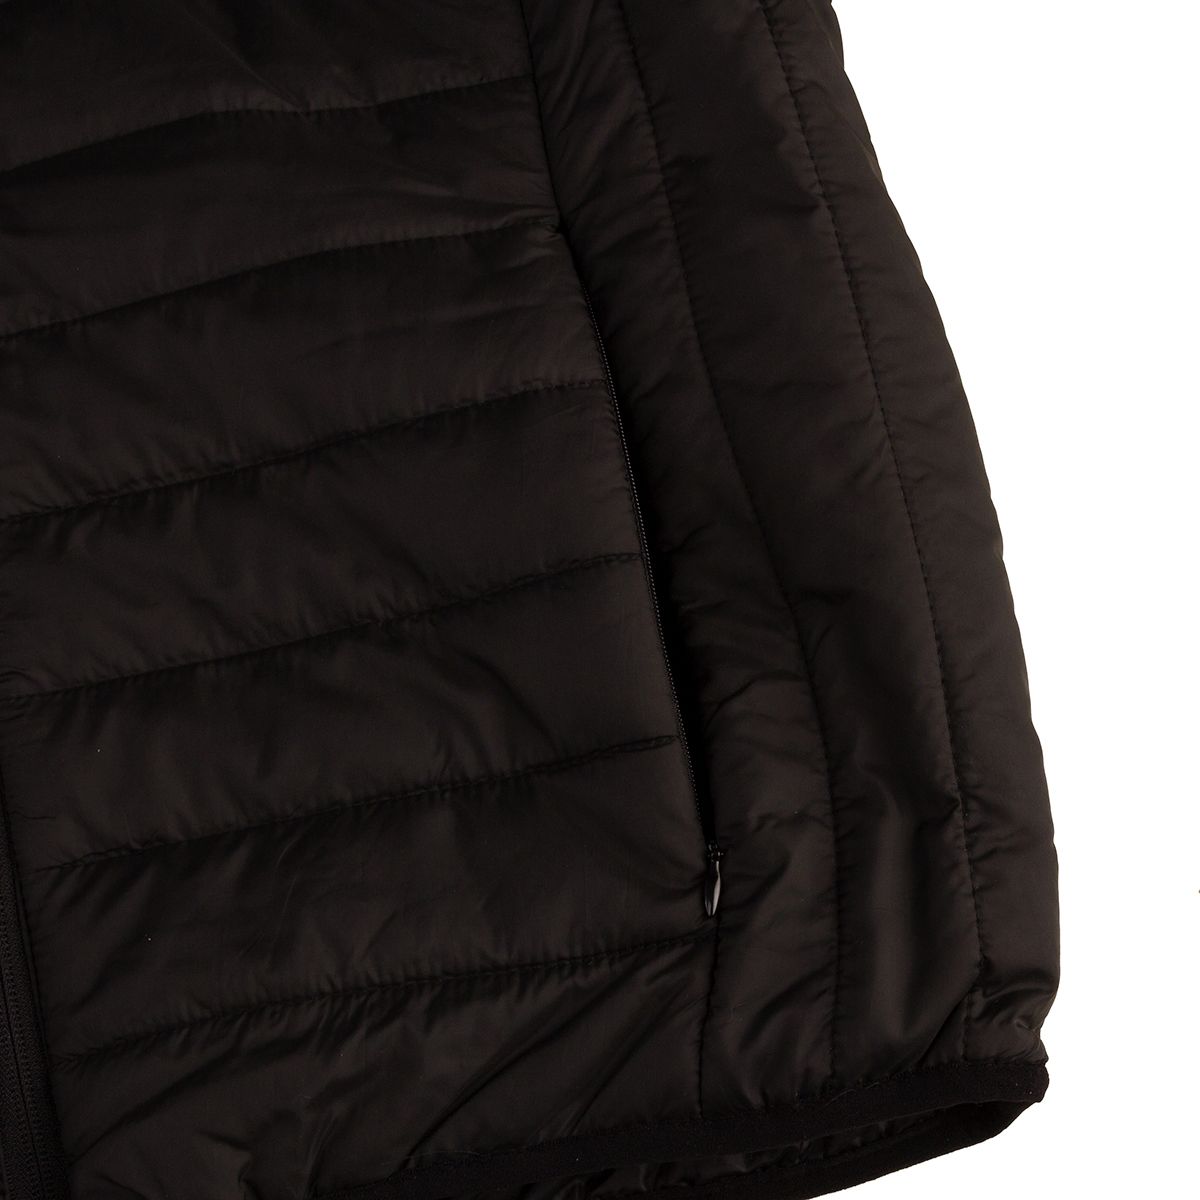 Stoic Packable Insulated Jacket - Men's | Backcountry